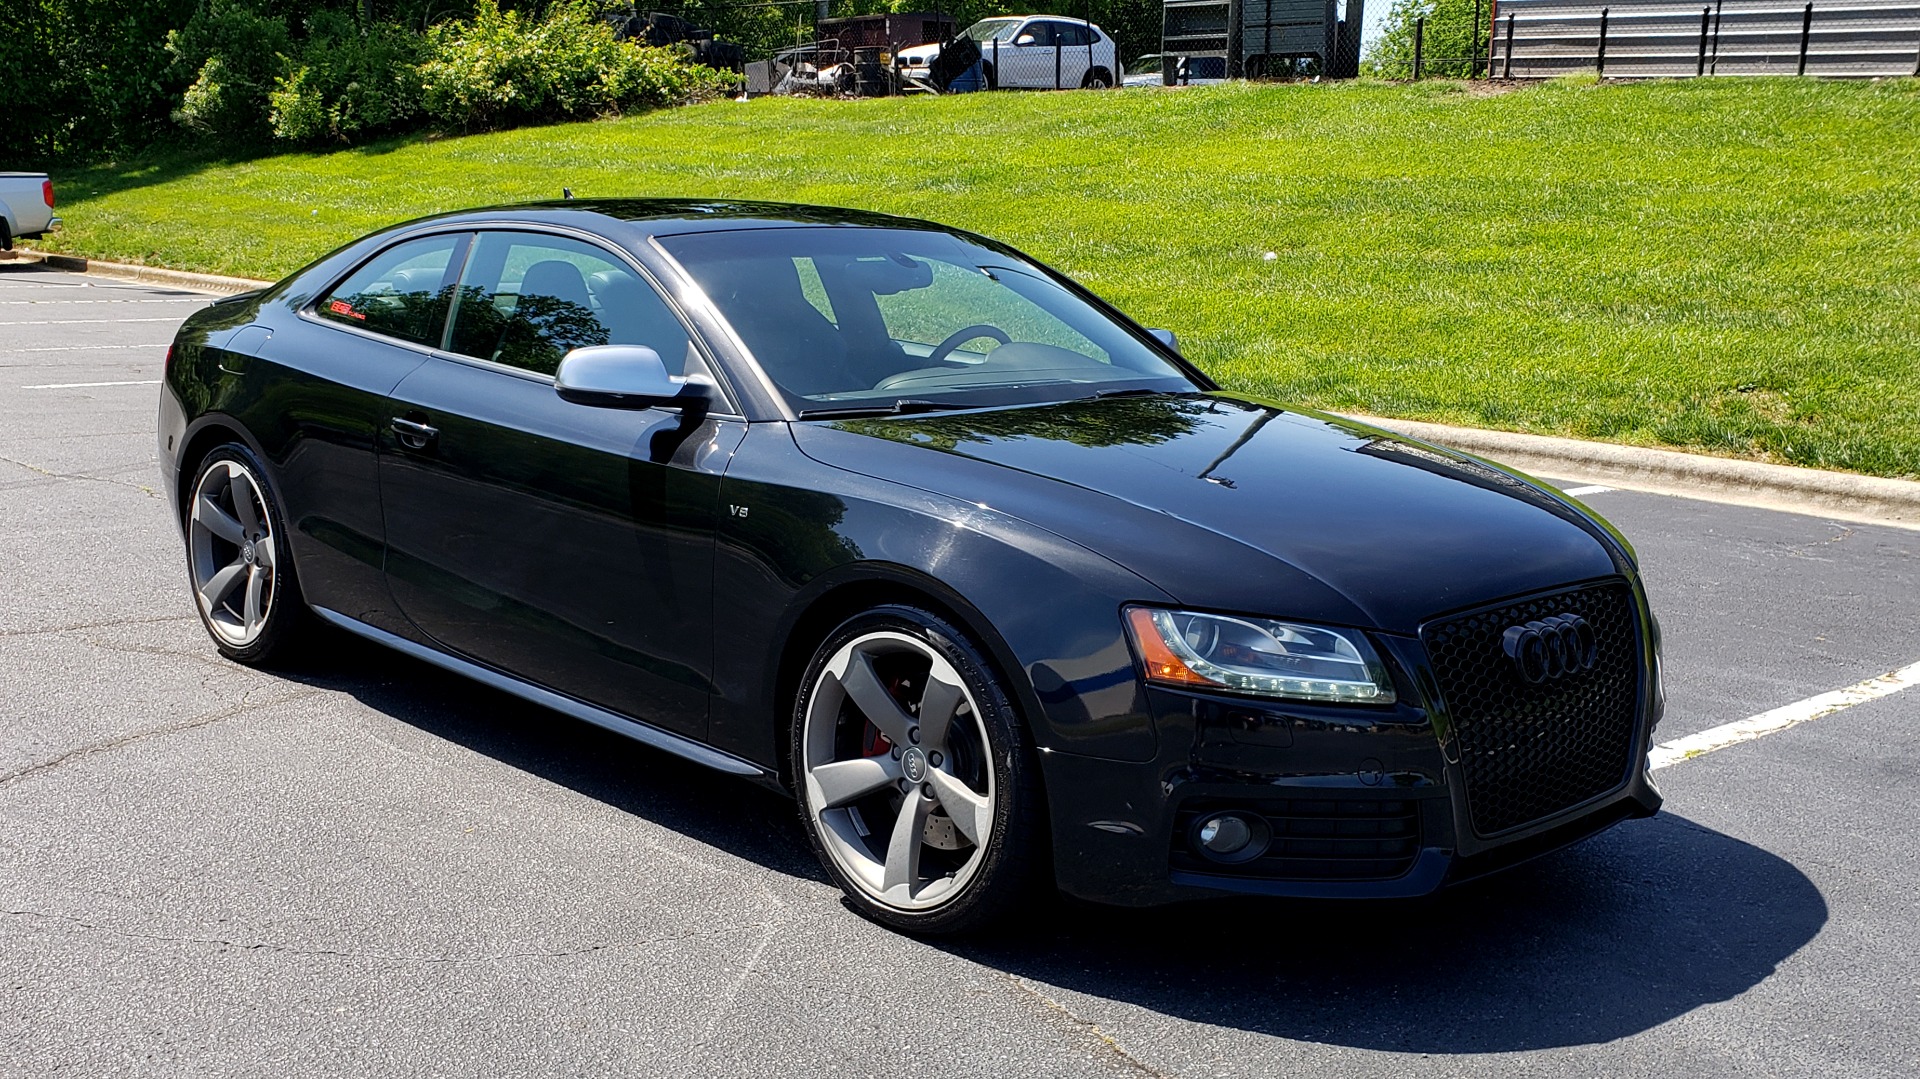 Used 2011 Audi S5 PREMIUM PLUS / AVENGERS COUPE / NAV / SUNROOF / REARVIEW for sale Sold at Formula Imports in Charlotte NC 28227 4